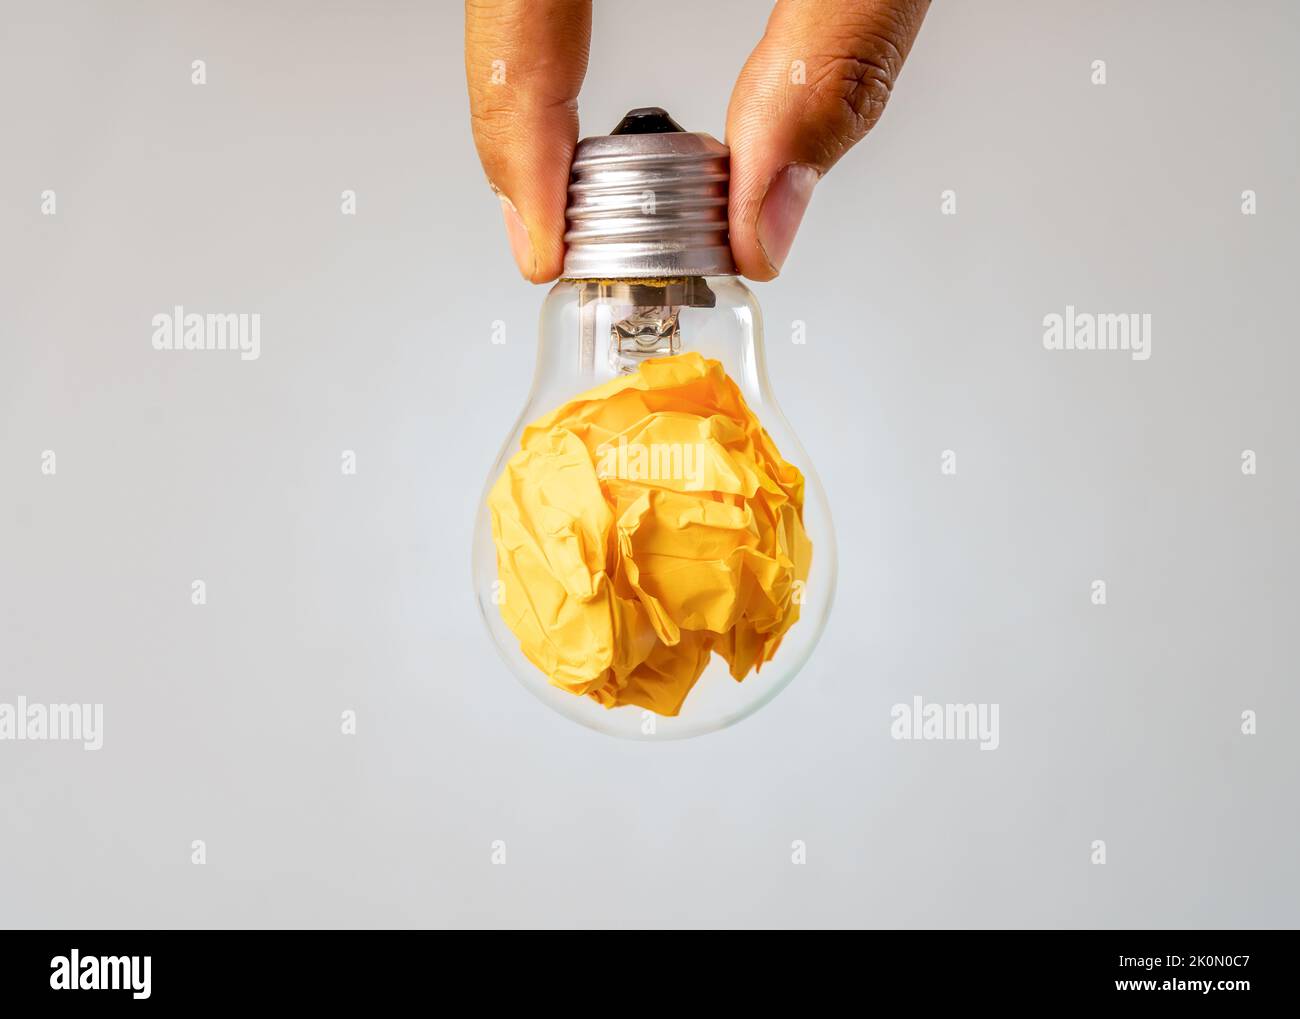 Close up photo of crumbled colorful paper and light bulb in the same frame as a symbol of persistance, perseverance and hardwork. Stock Photo